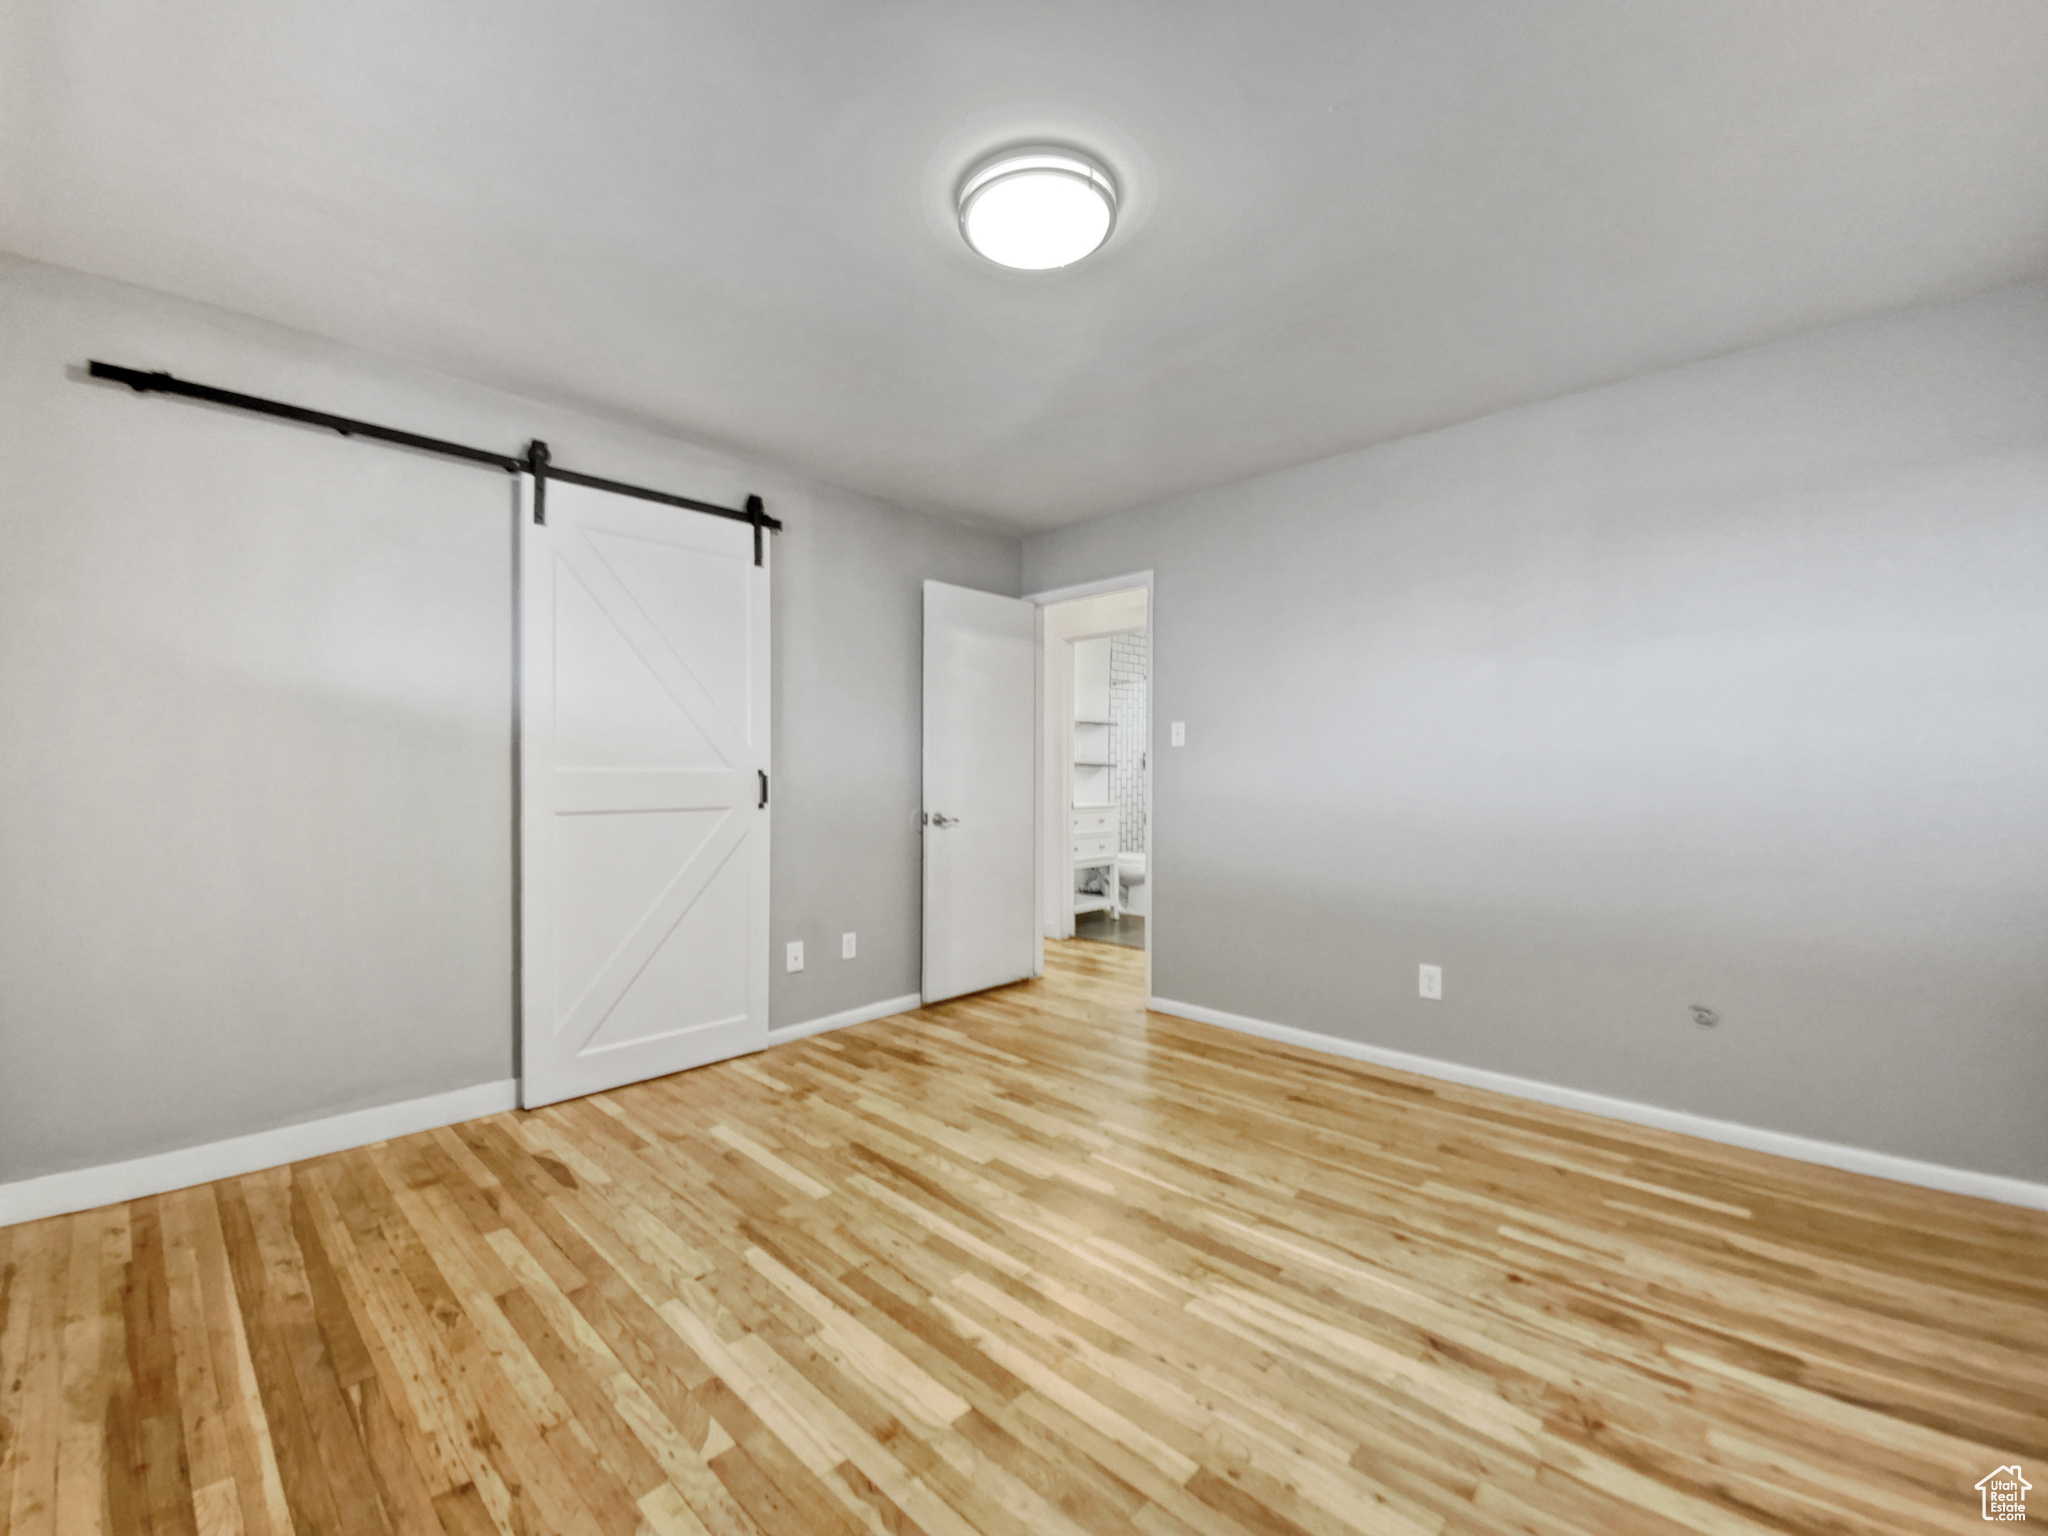 Unfurnished bedroom with a barn door and light hardwood / wood-style floors